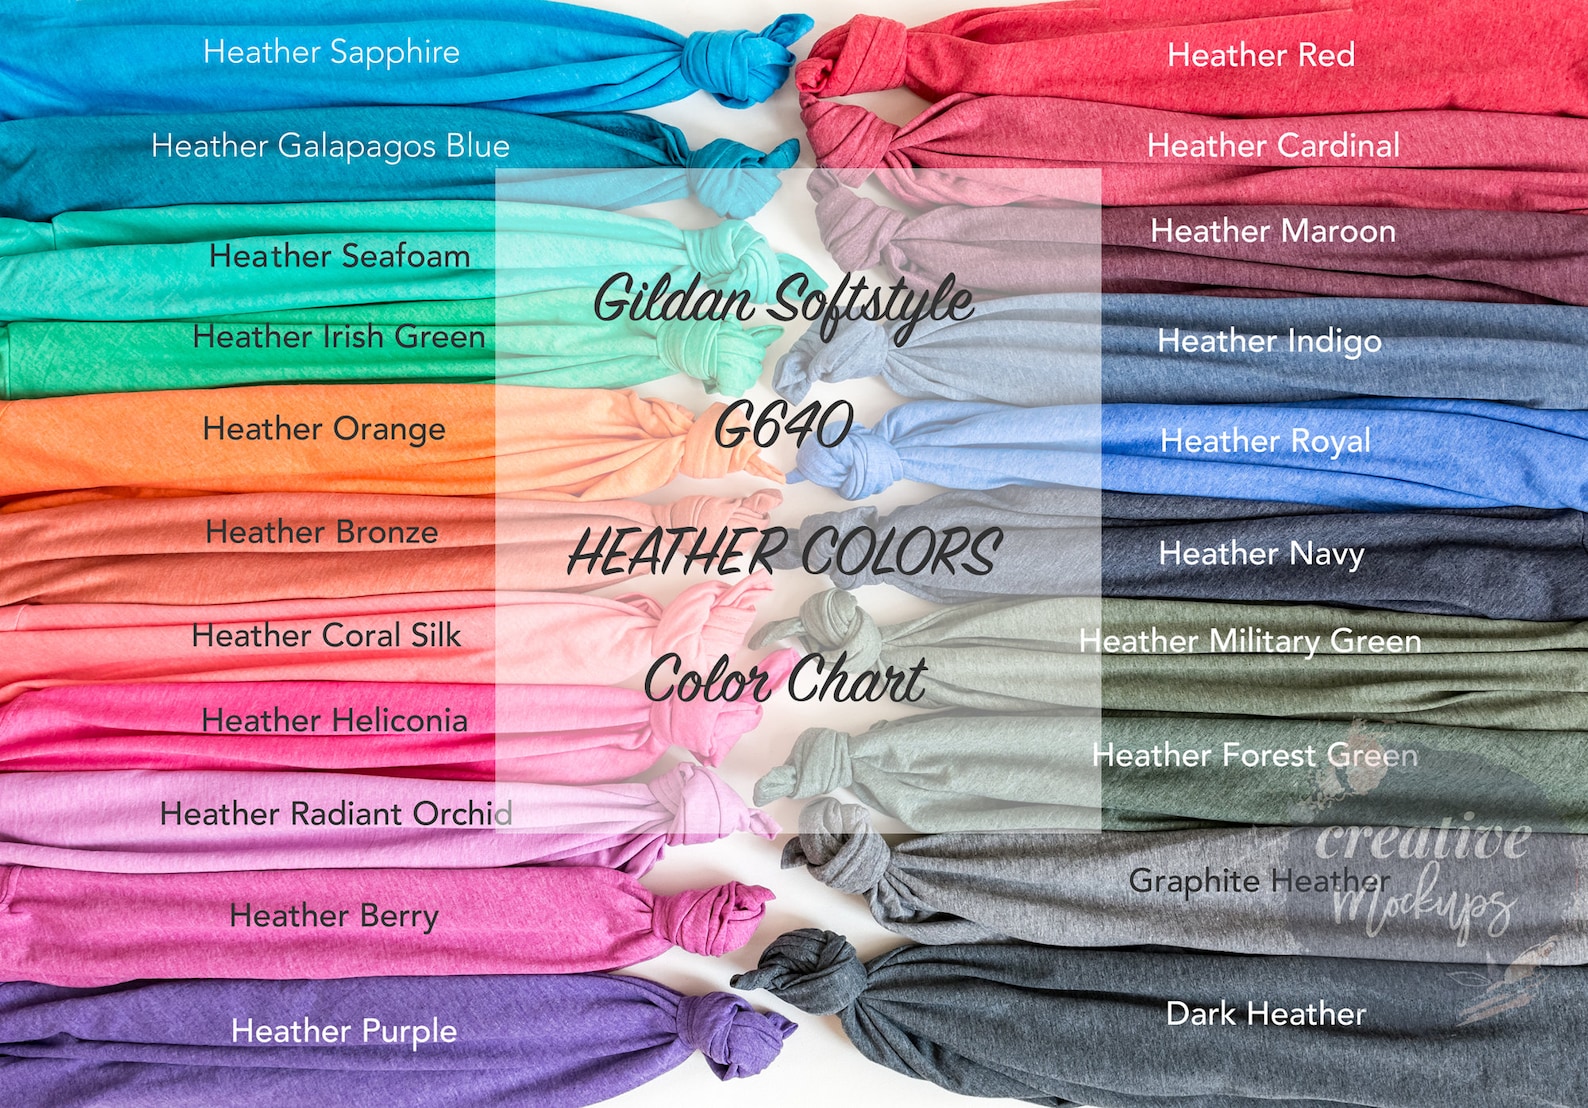 Gildan Softstyle Heather Colors G640 / Complete 21 Heather - Etsy